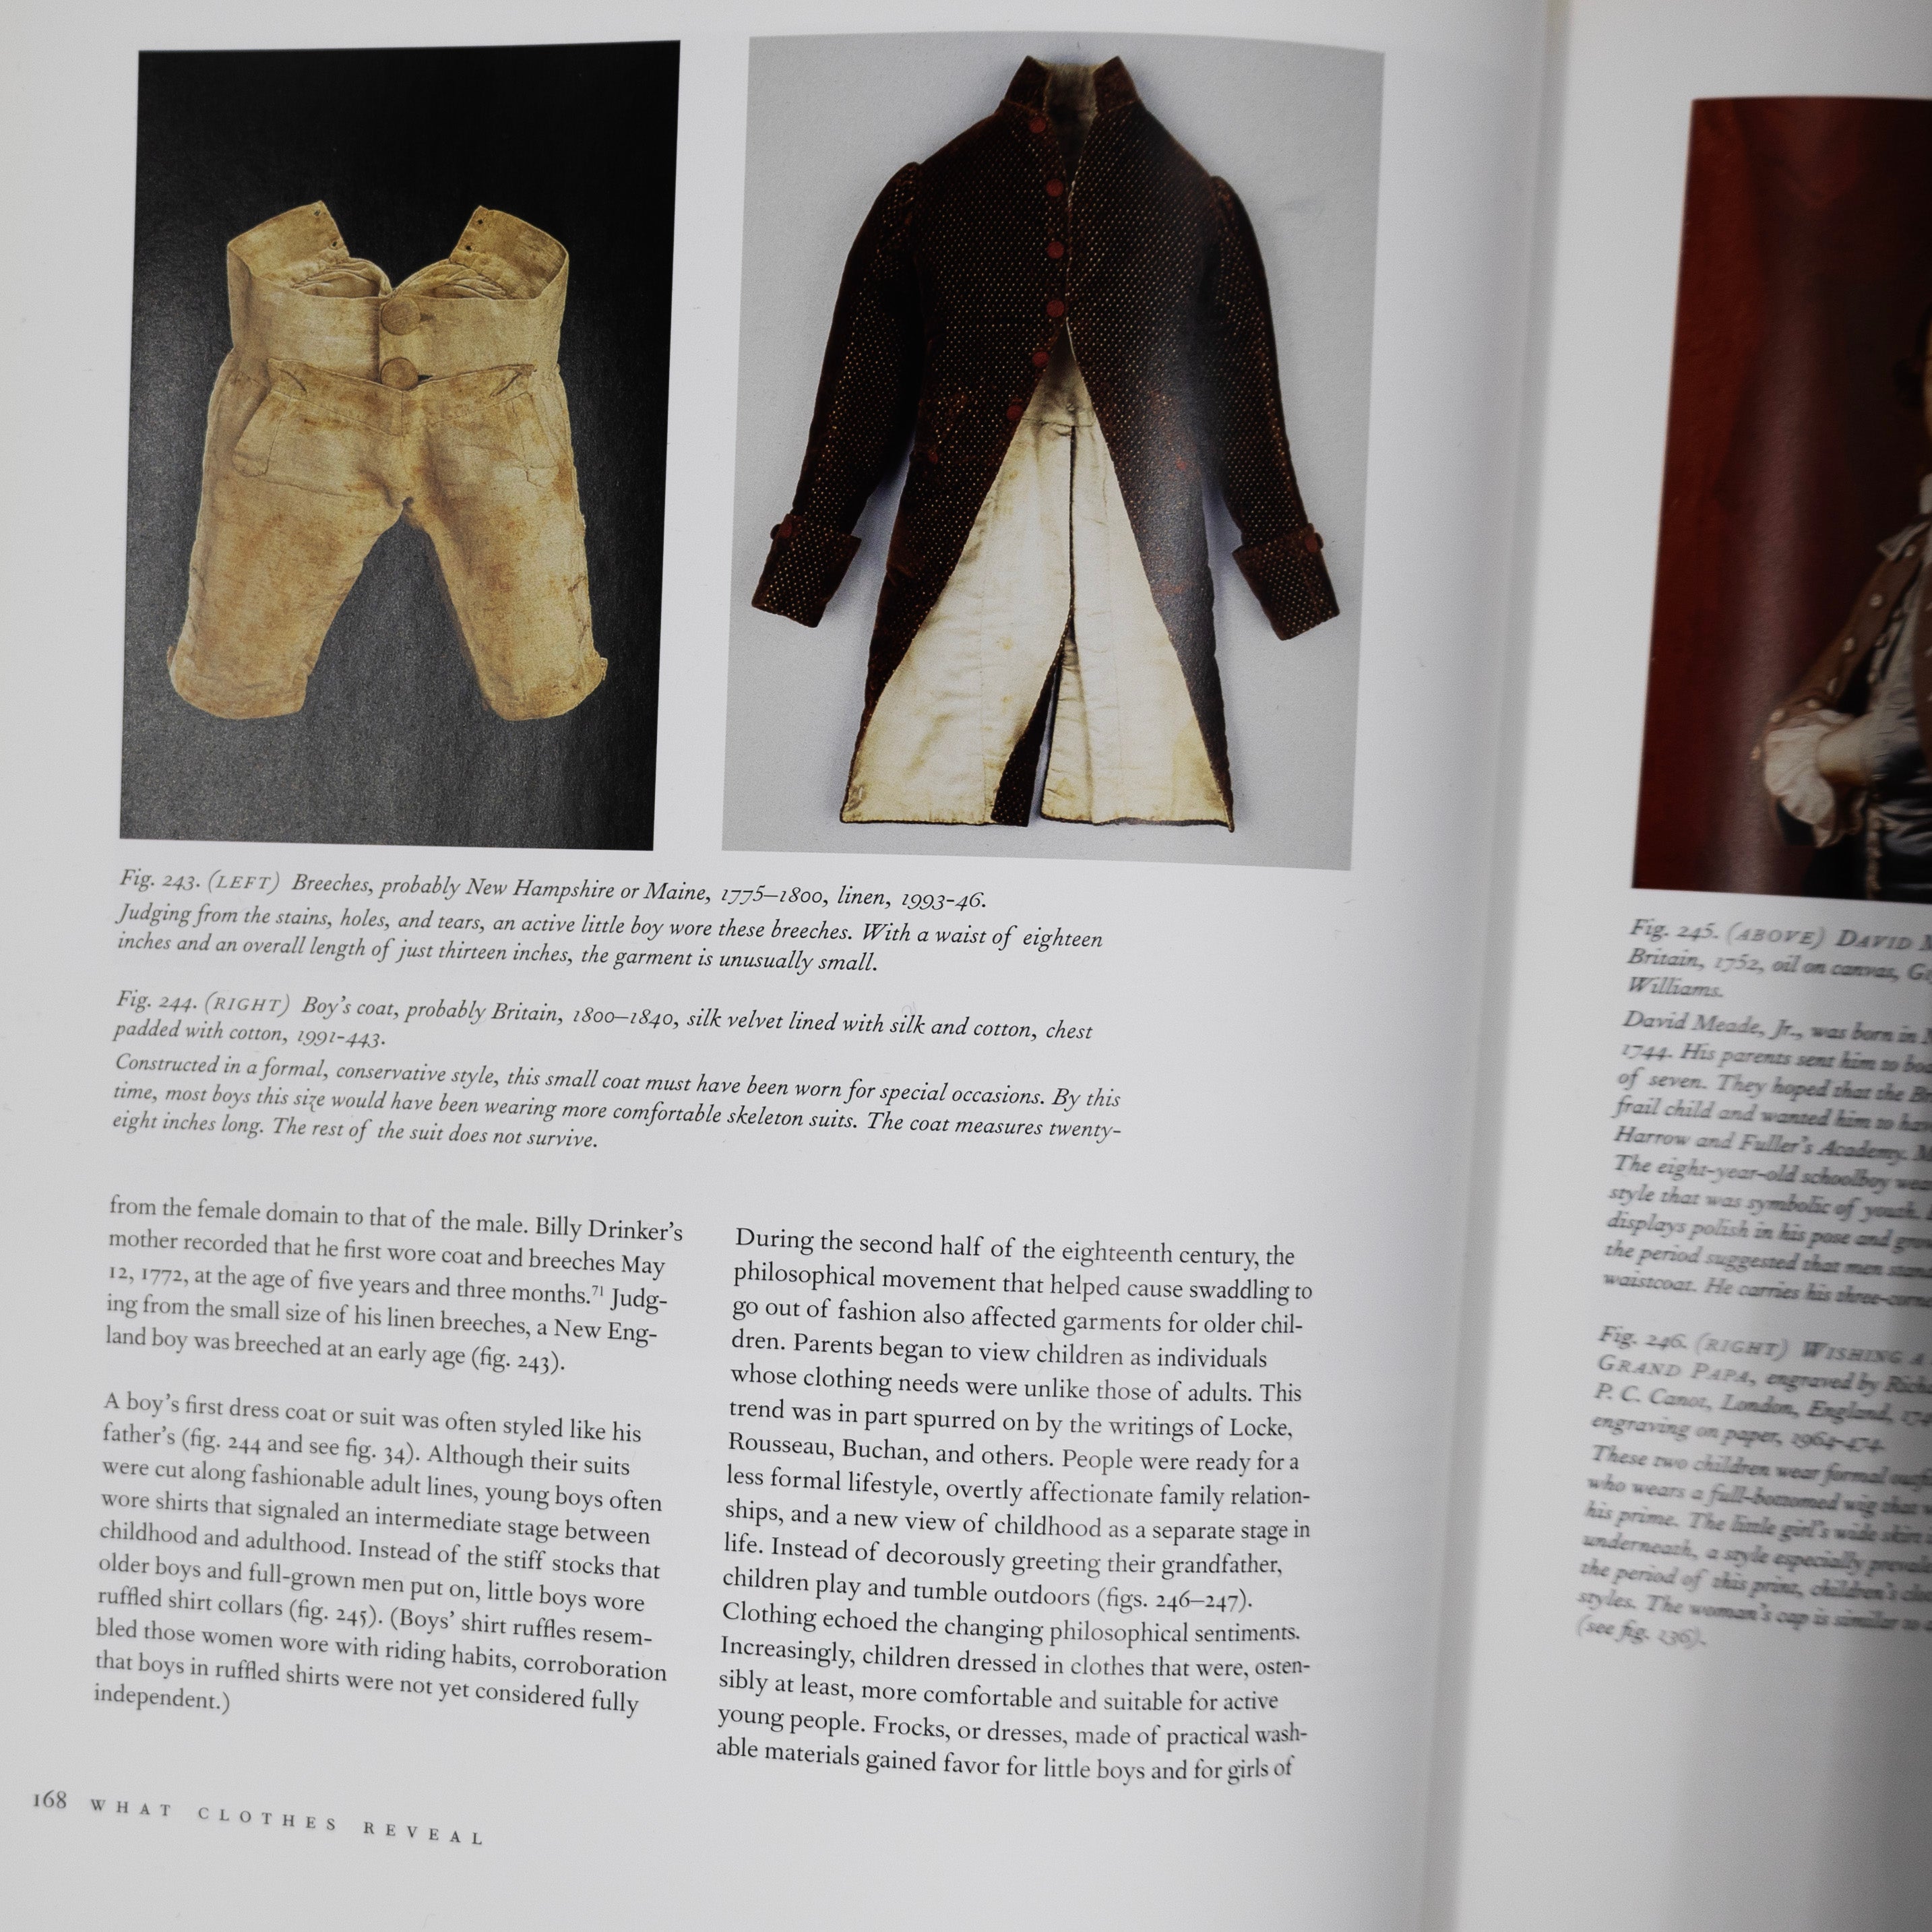 What Clothes Reveal: The Language of Clothing in Colonial & Federal America By Linda Baumgarten - Burnley & Trowbridge Co.